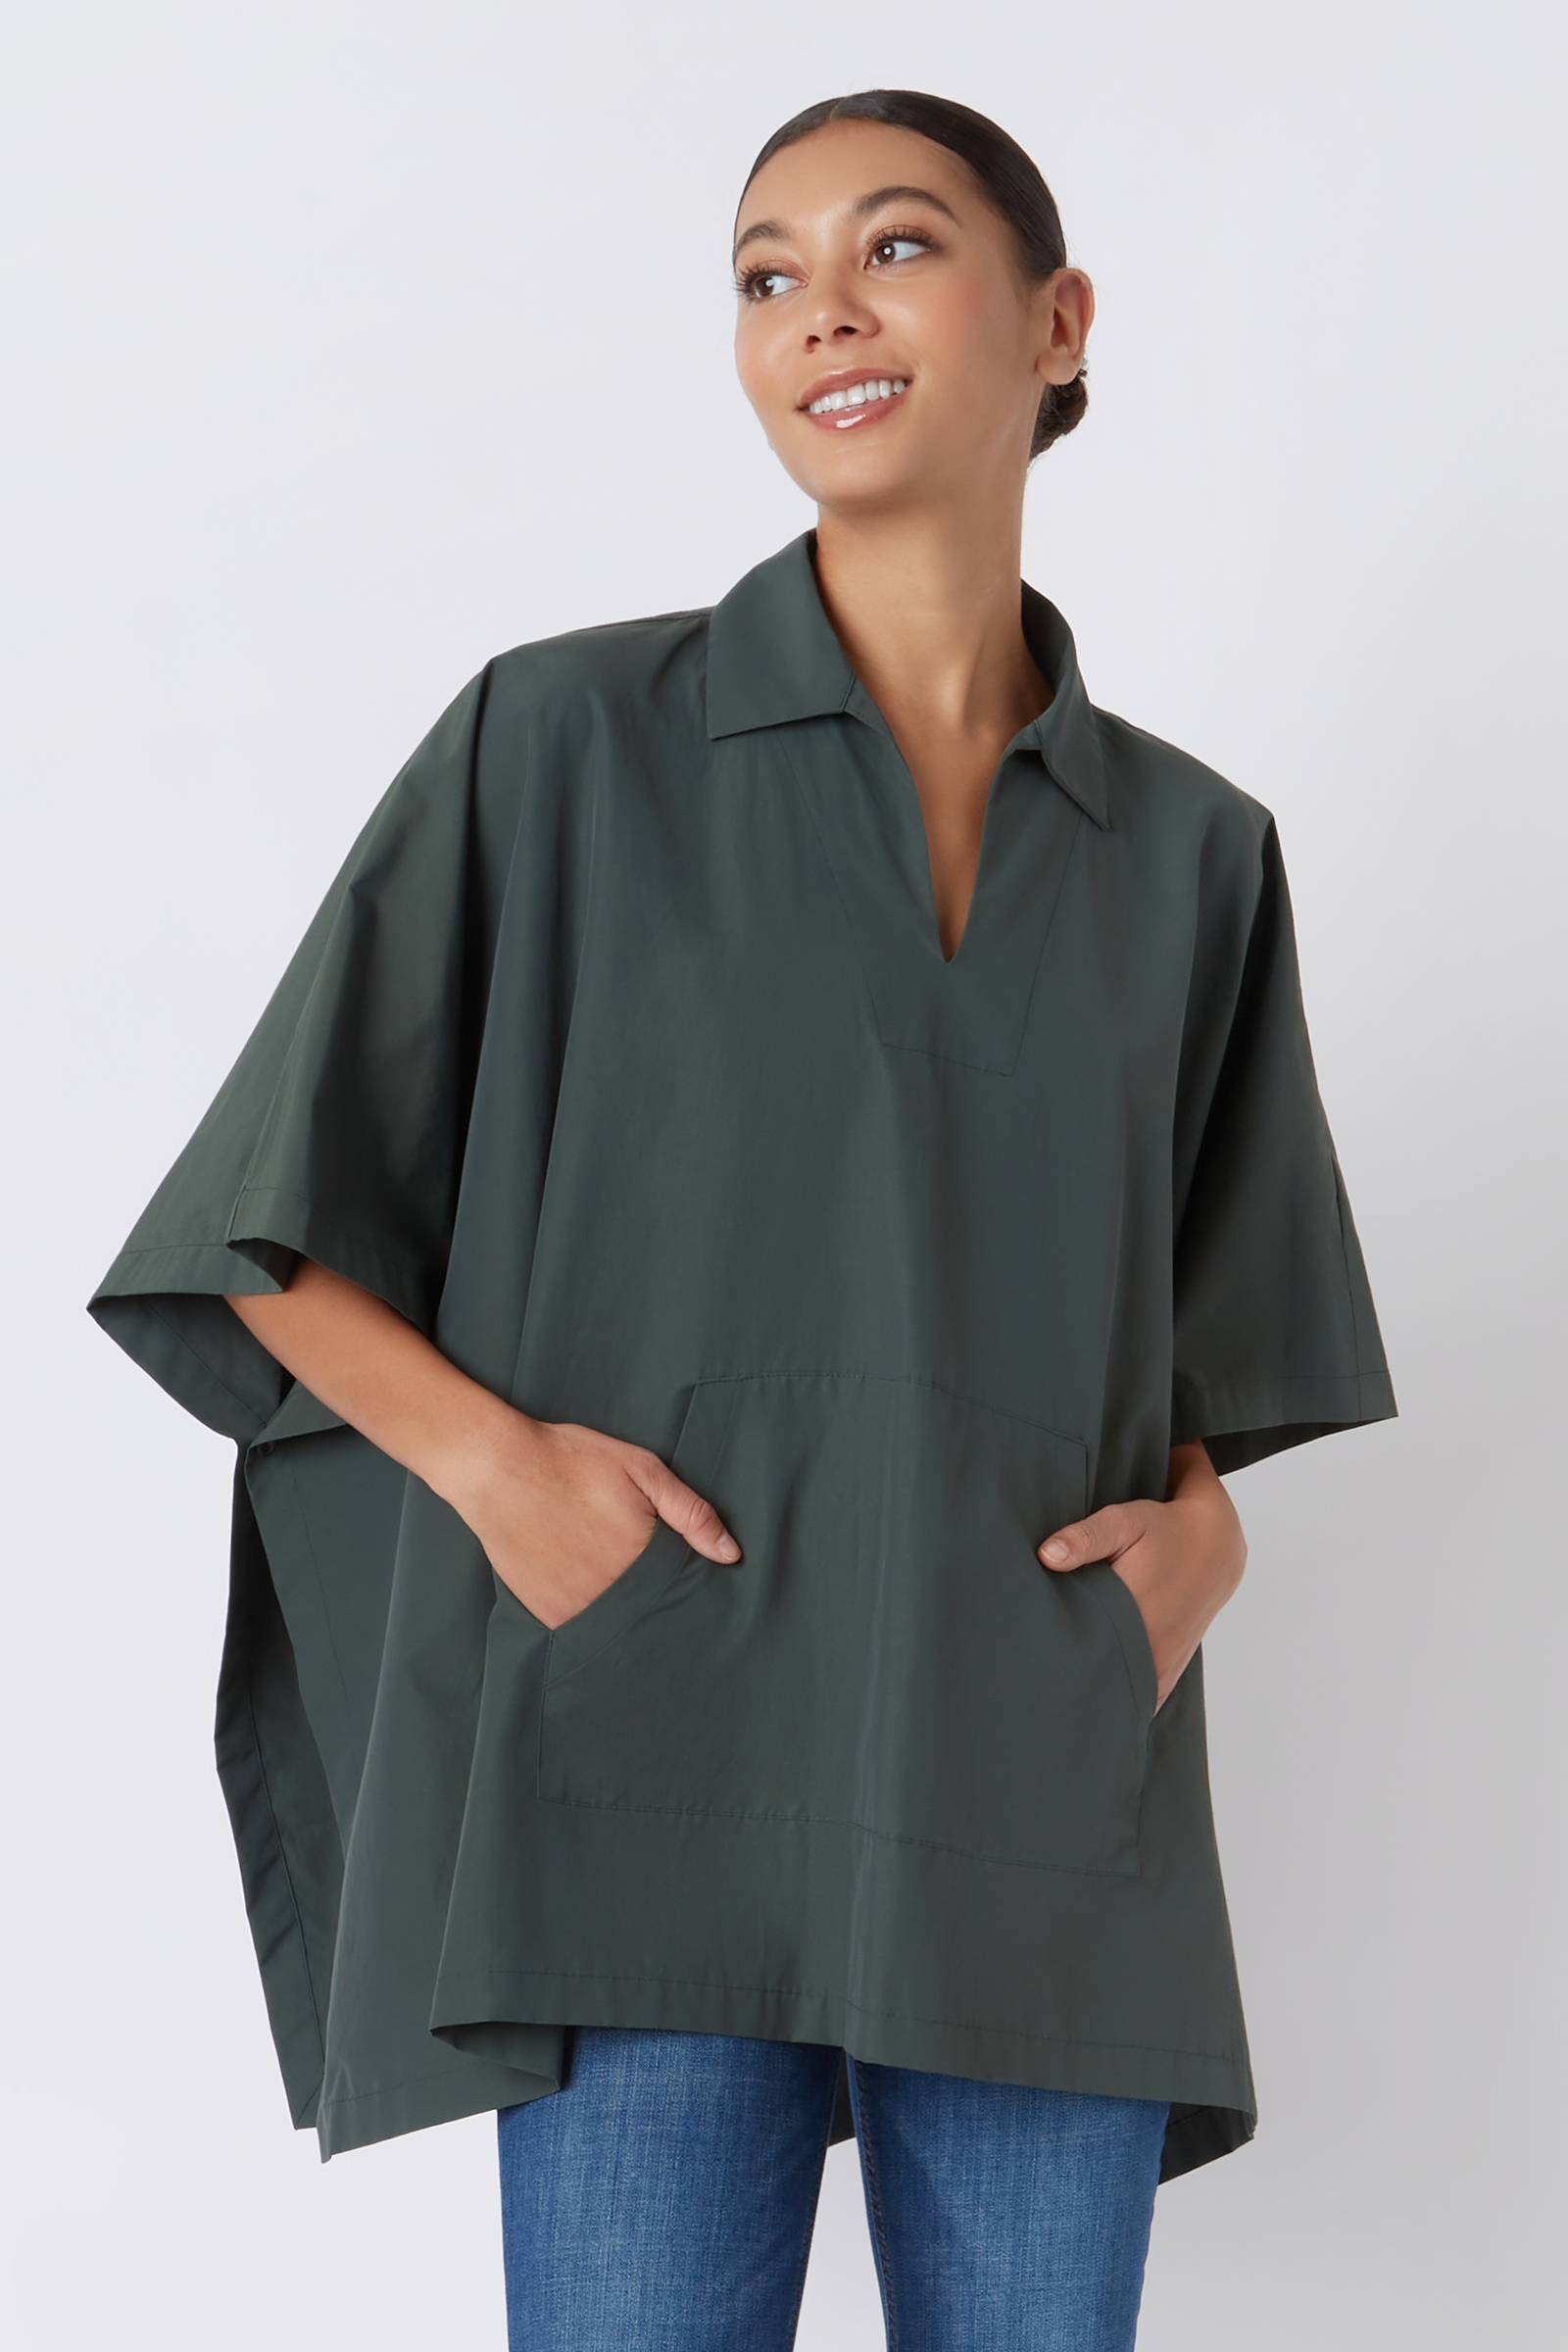 Kal Rieman Pocket Poncho in Loden on Model with Hands in Pocket Cropped Front View